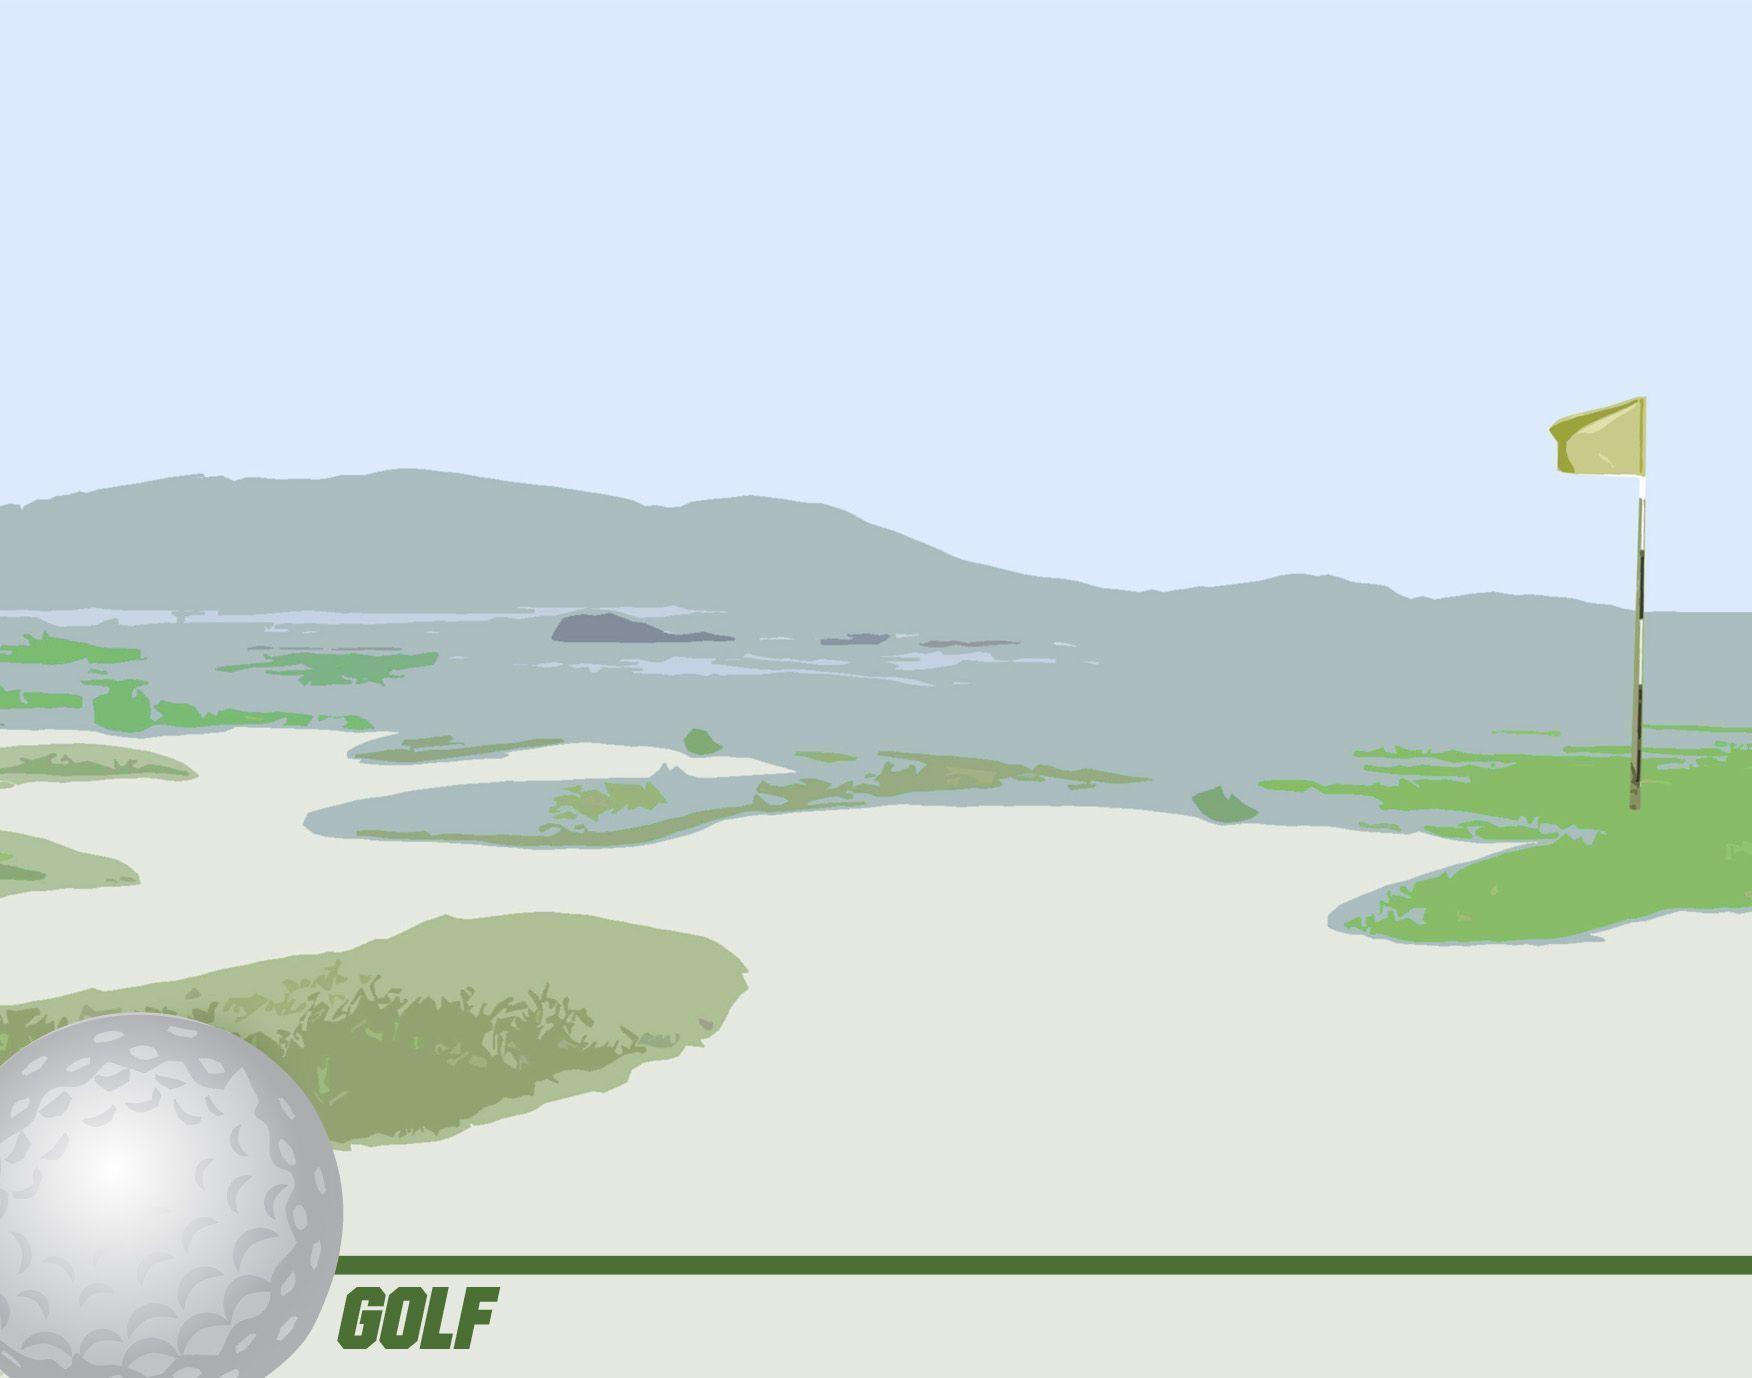 Sport of Golf Background for Powerpoint Presentations, Sport